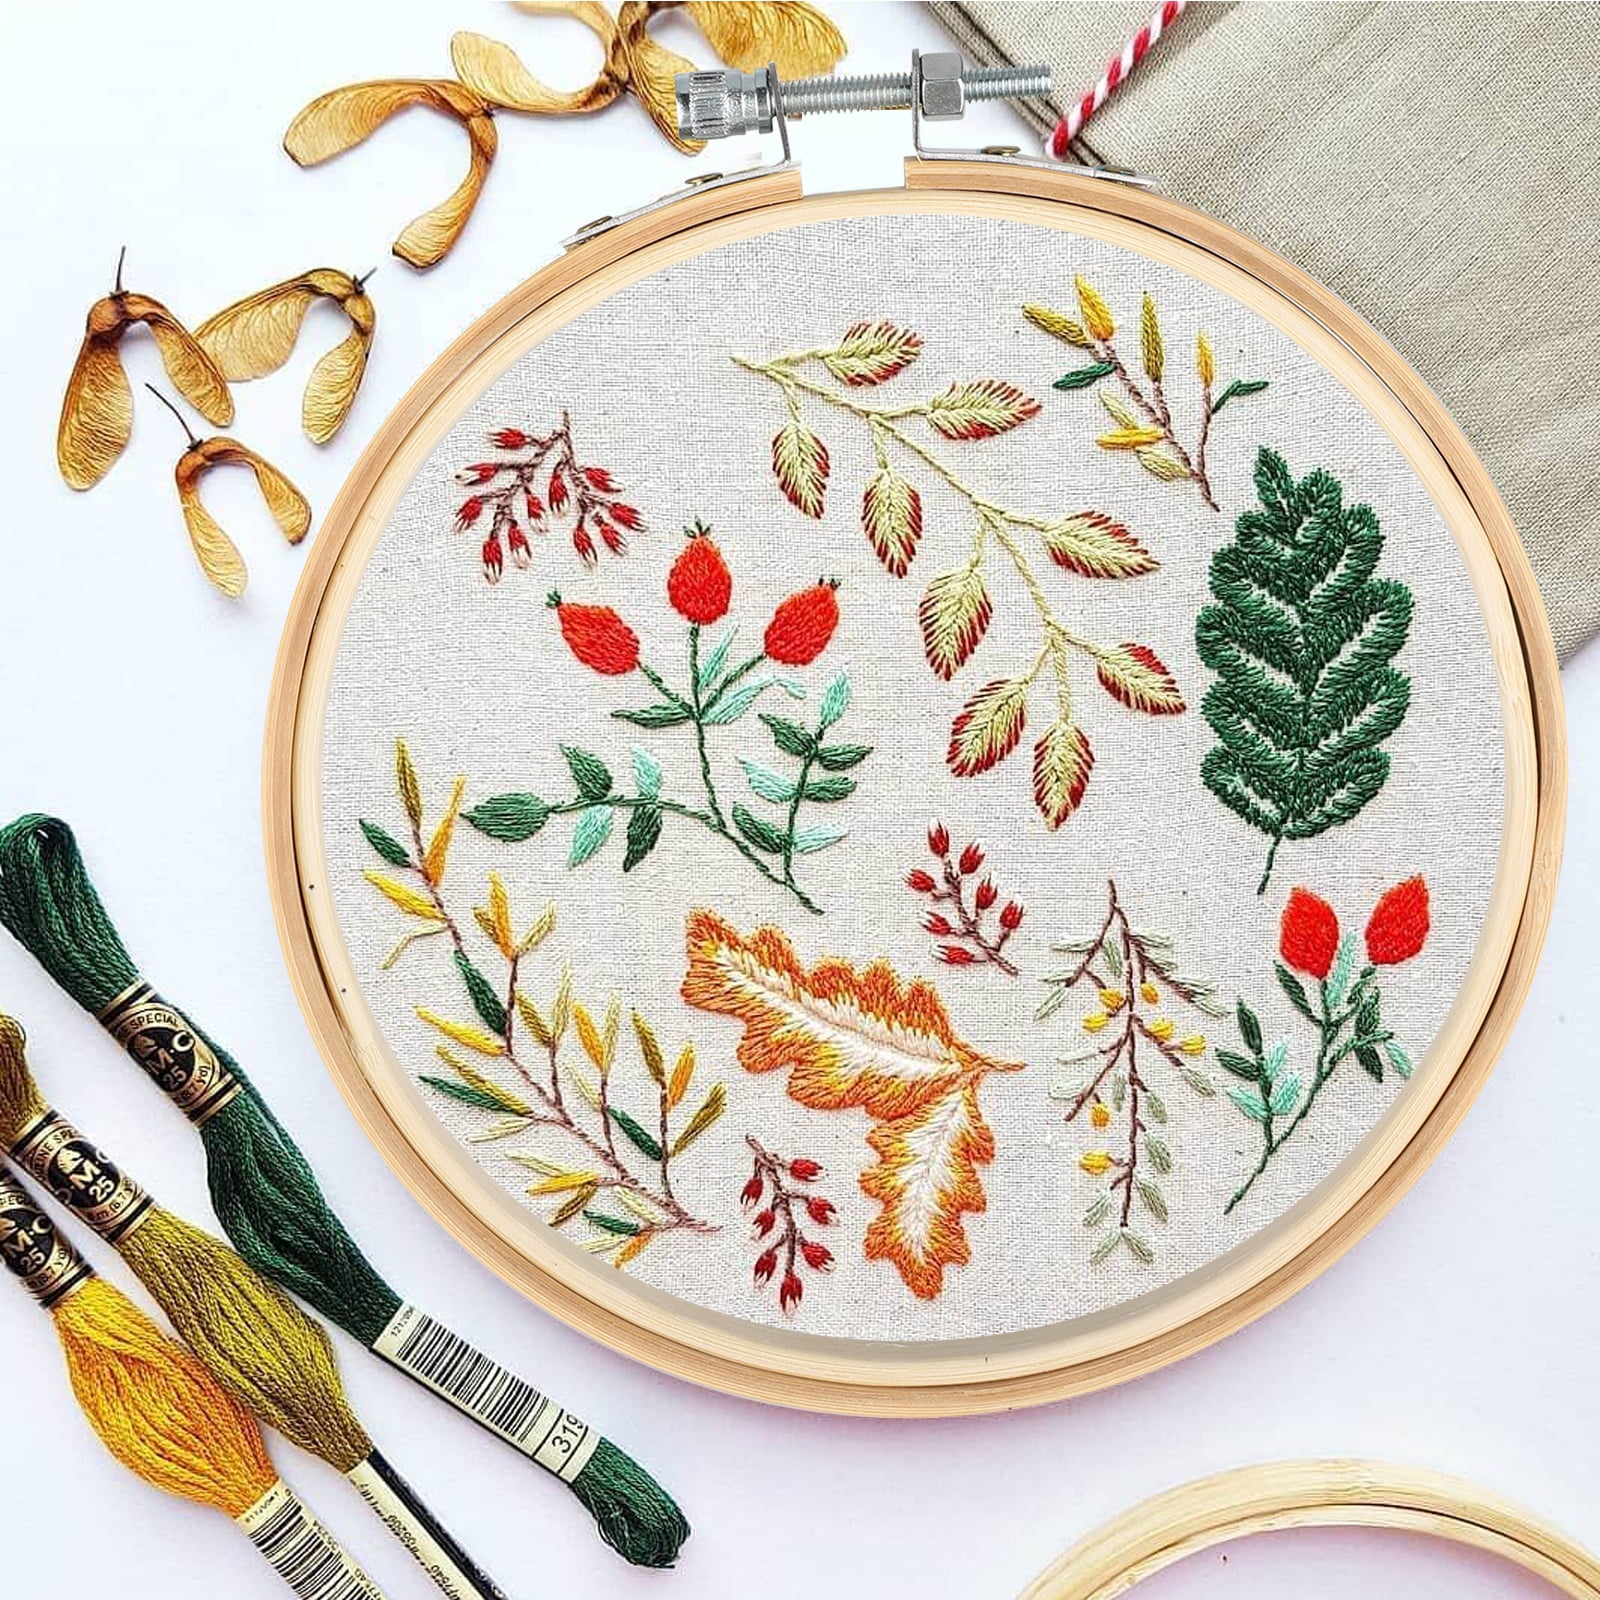 Aoibrloy 3 Pieces Embroidery Hoop 12 Inch Large Cross Stitch Hoop Round  Wood Embroidery Hoop For Sewing